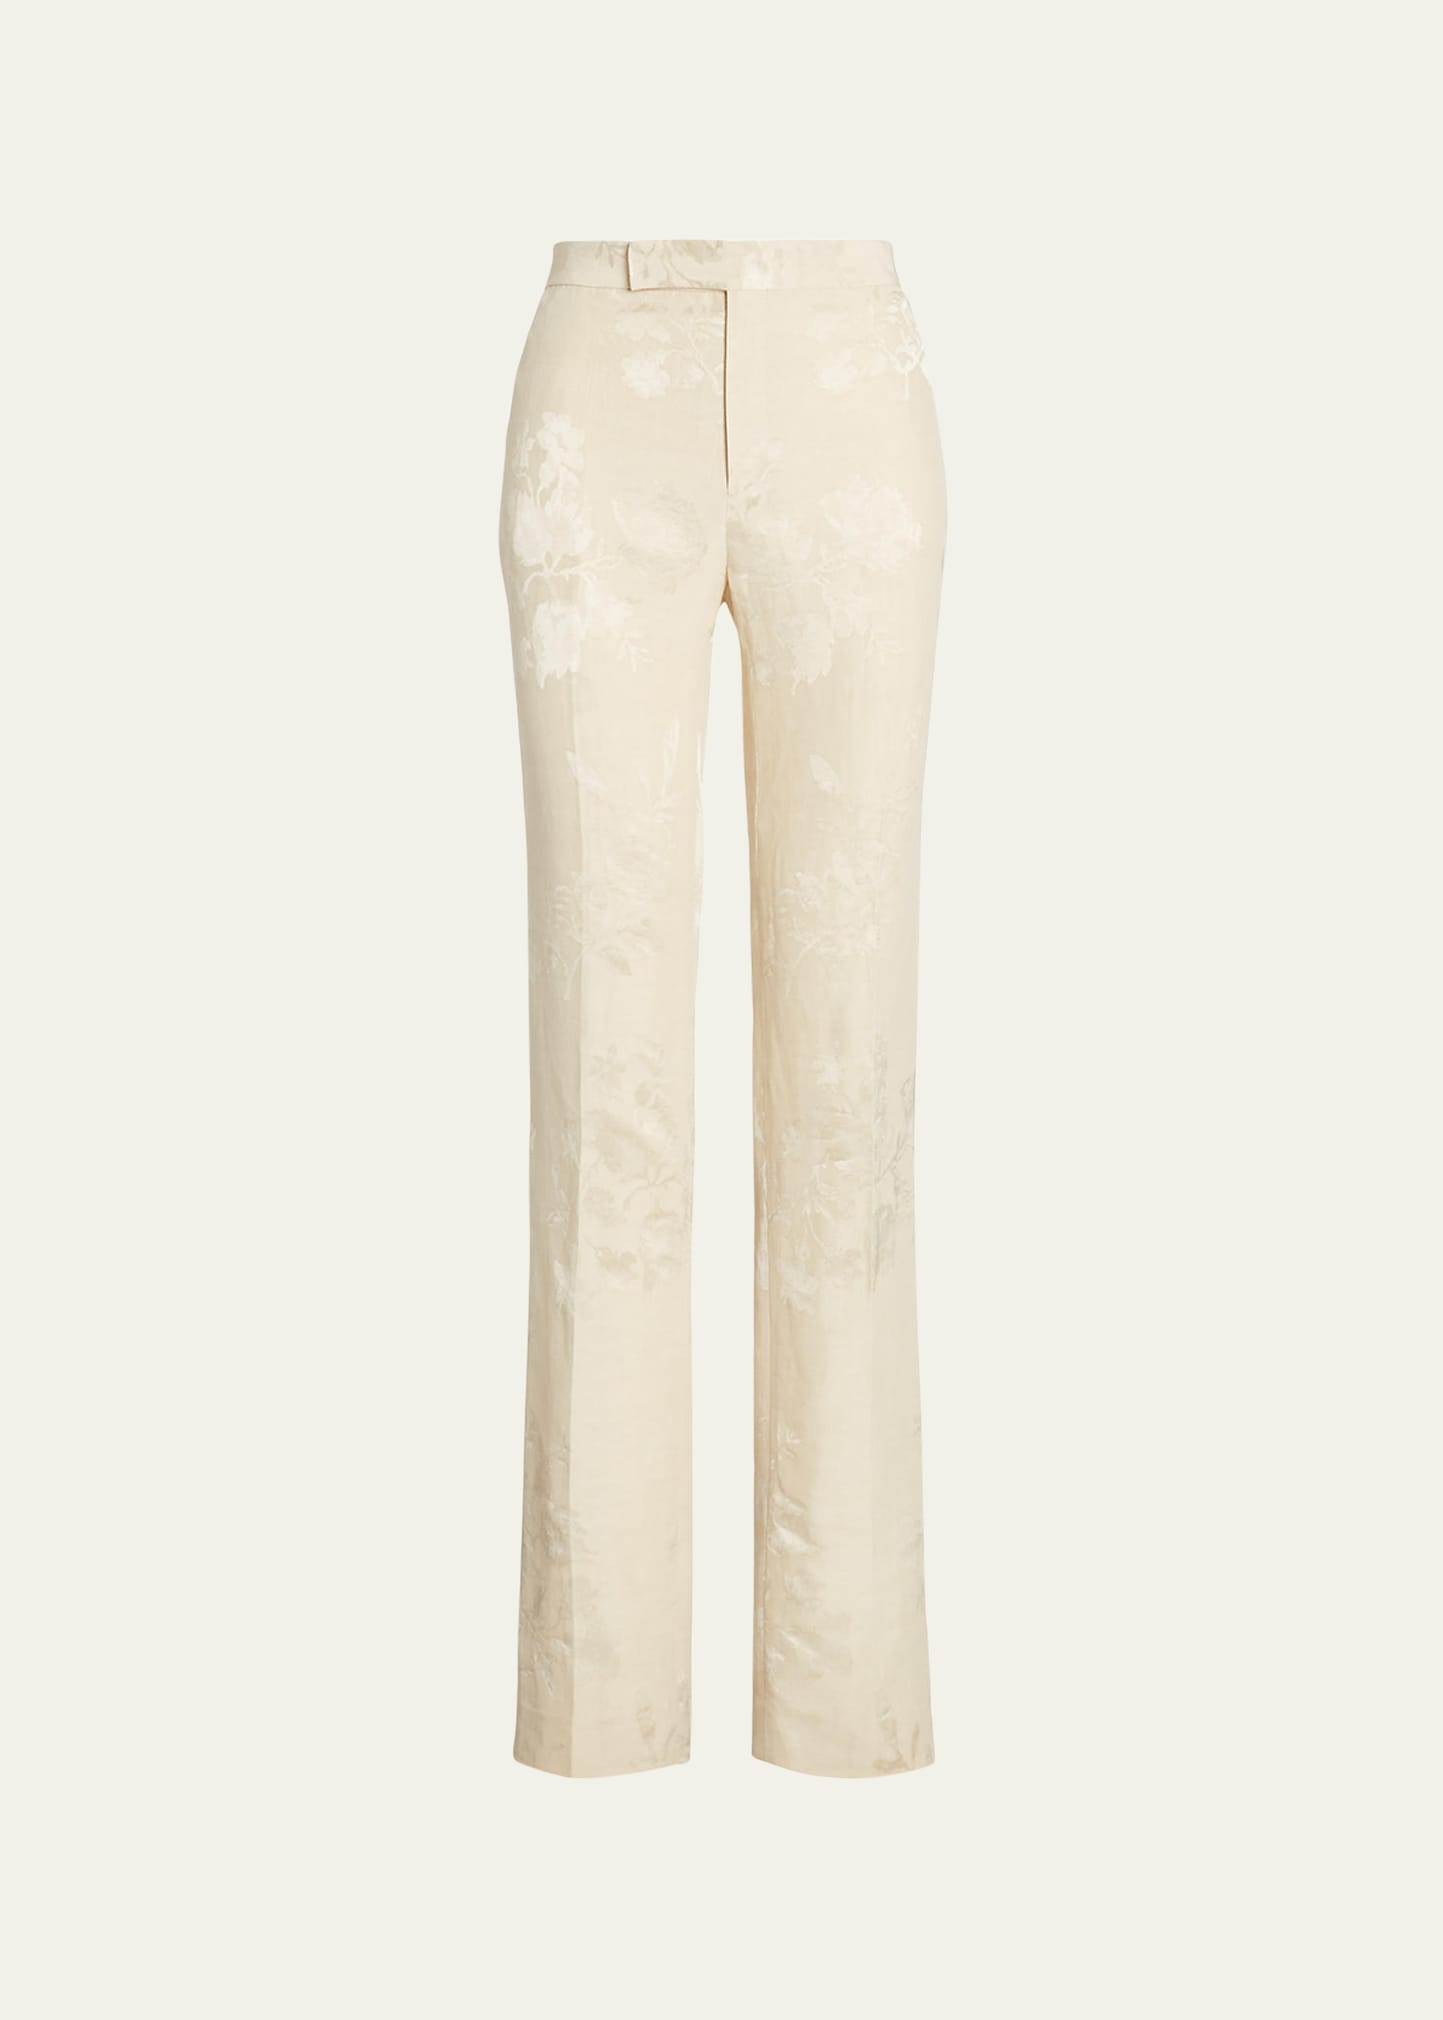 Seth Floral Jacquard Suiting Trousers